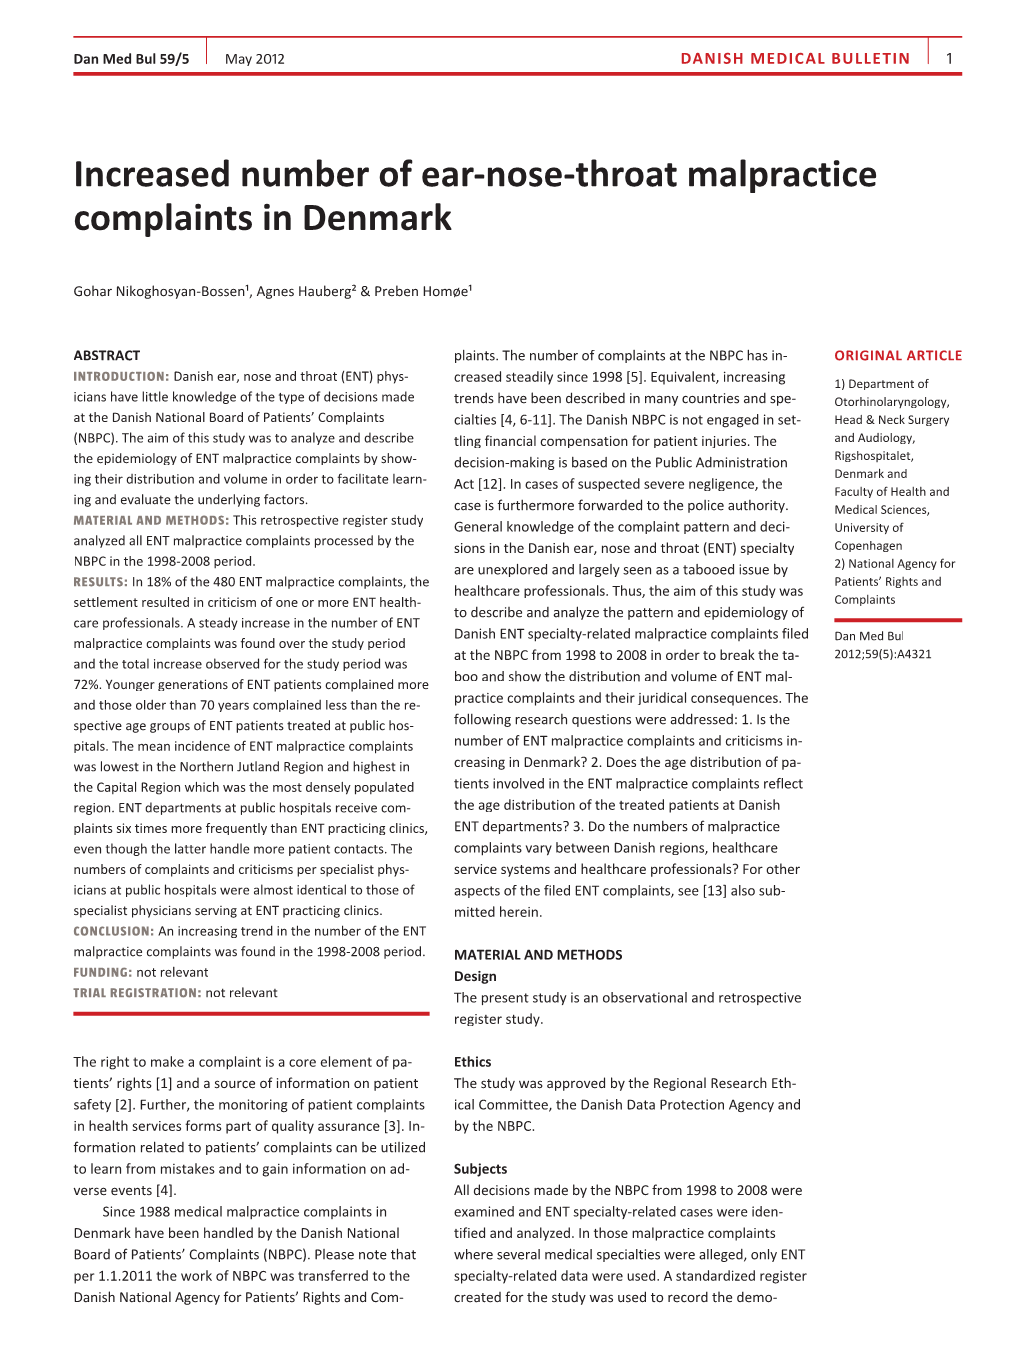 Increased Number of Ear-Nose-Throat Malpractice Complaints in Denmark